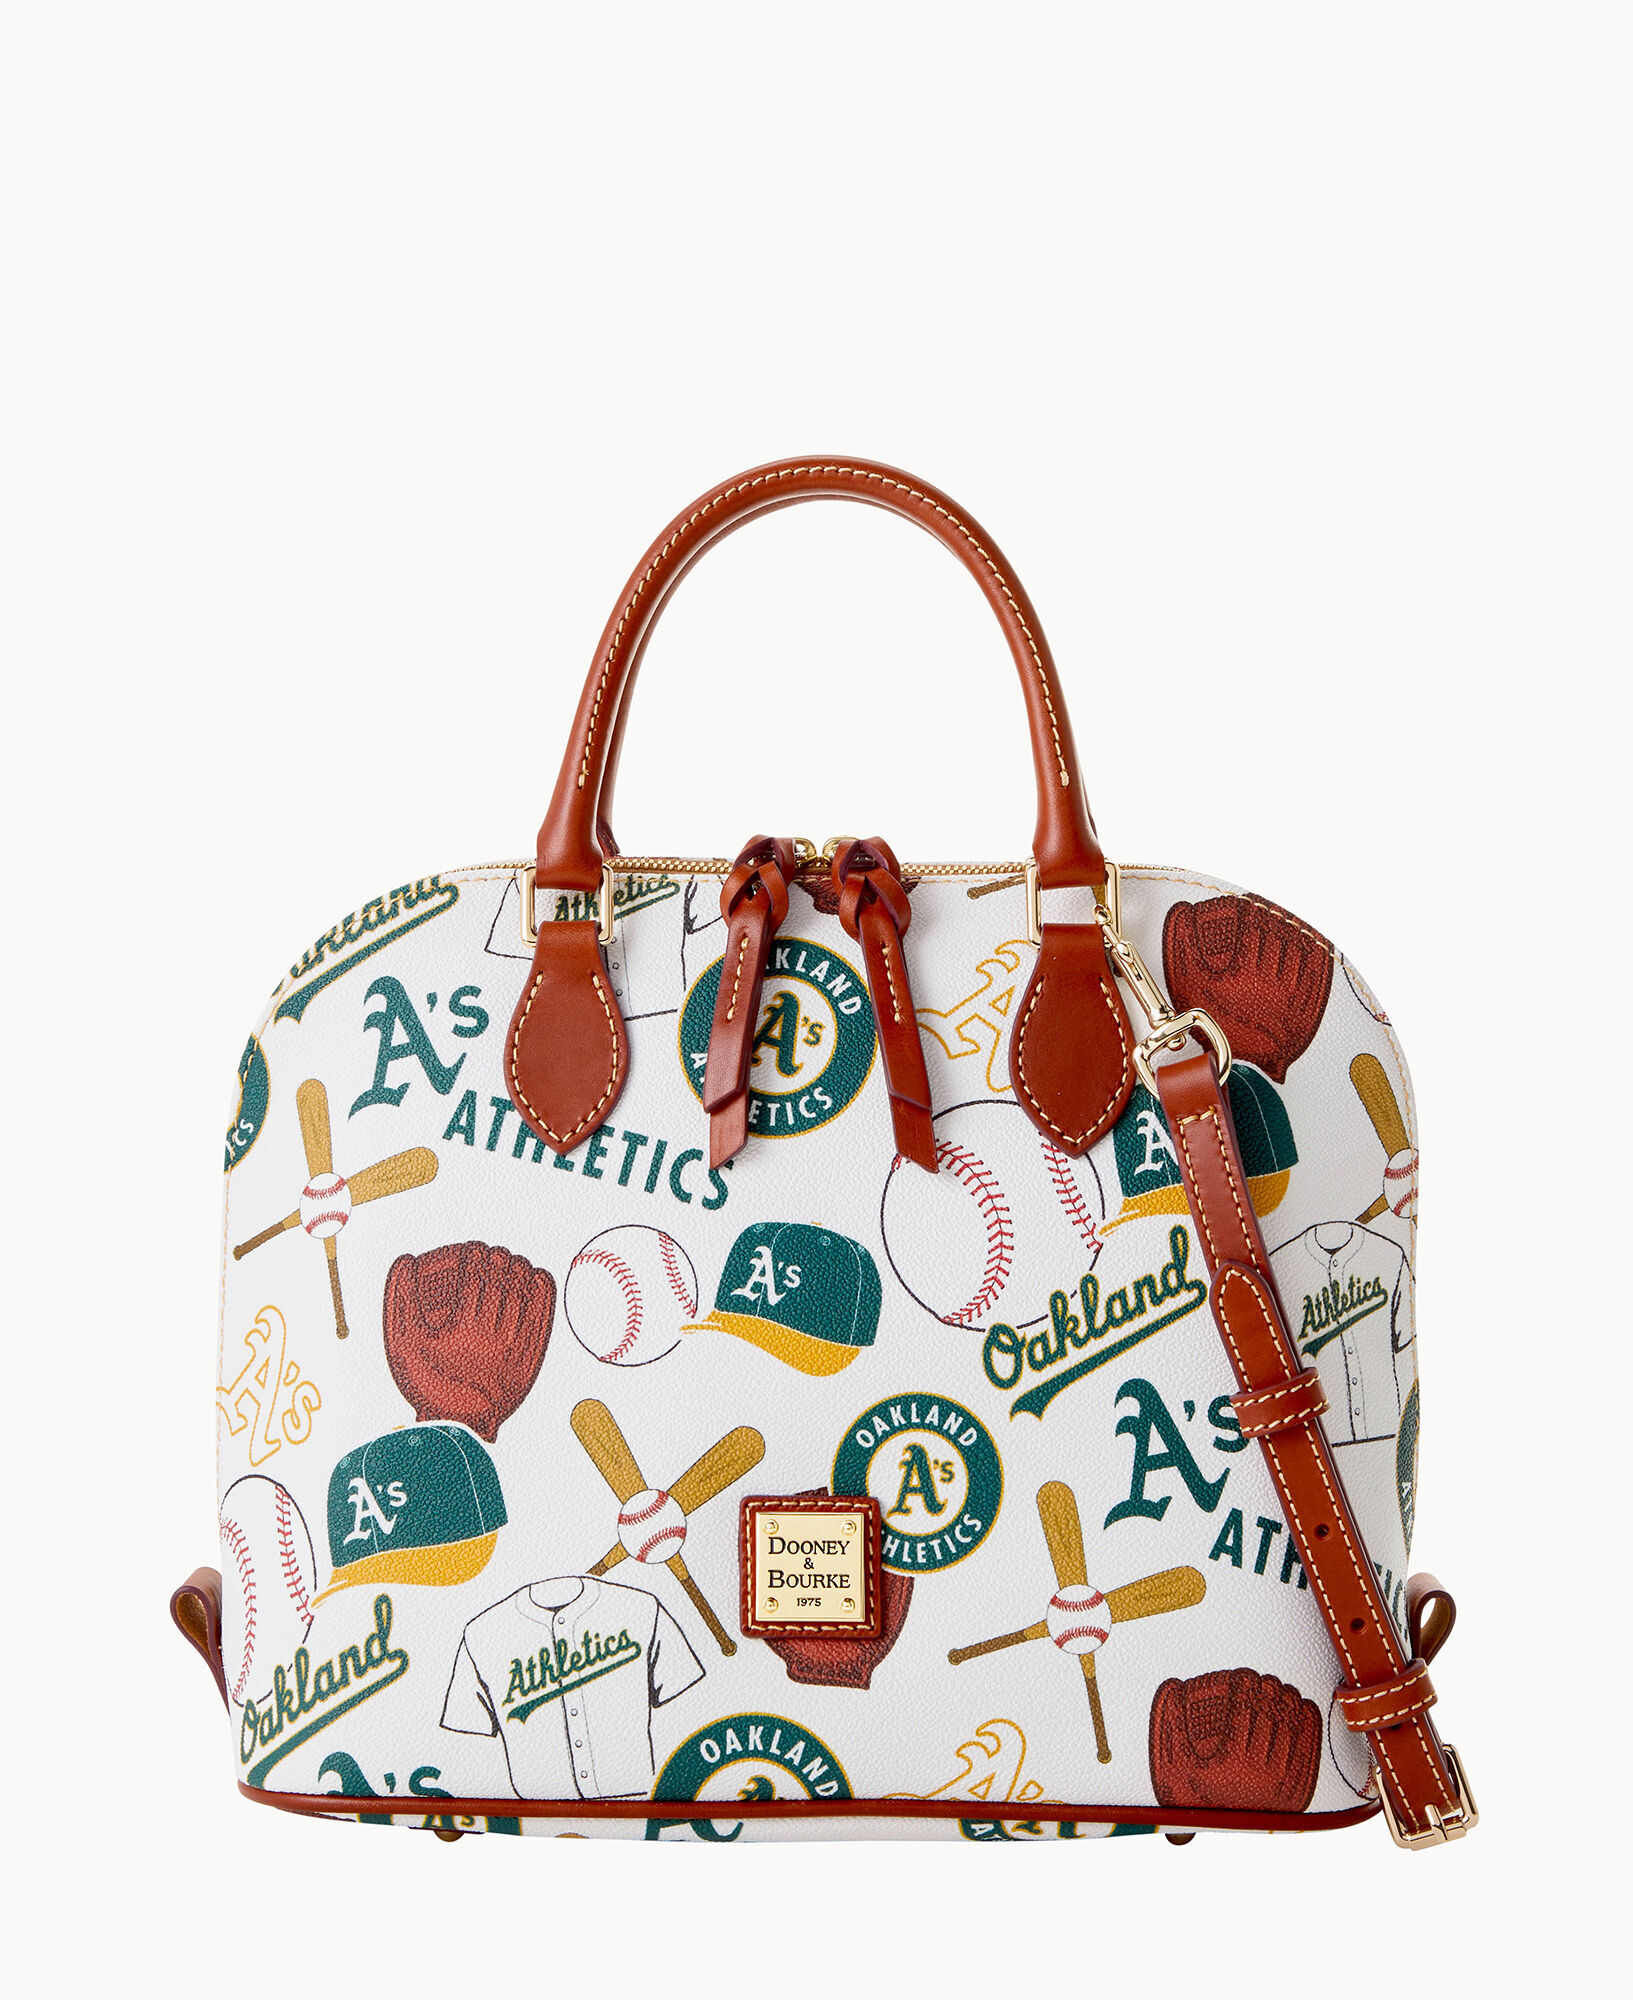 Official Oakland Athletics Bags, A's Backpacks, Luggage, Handbags